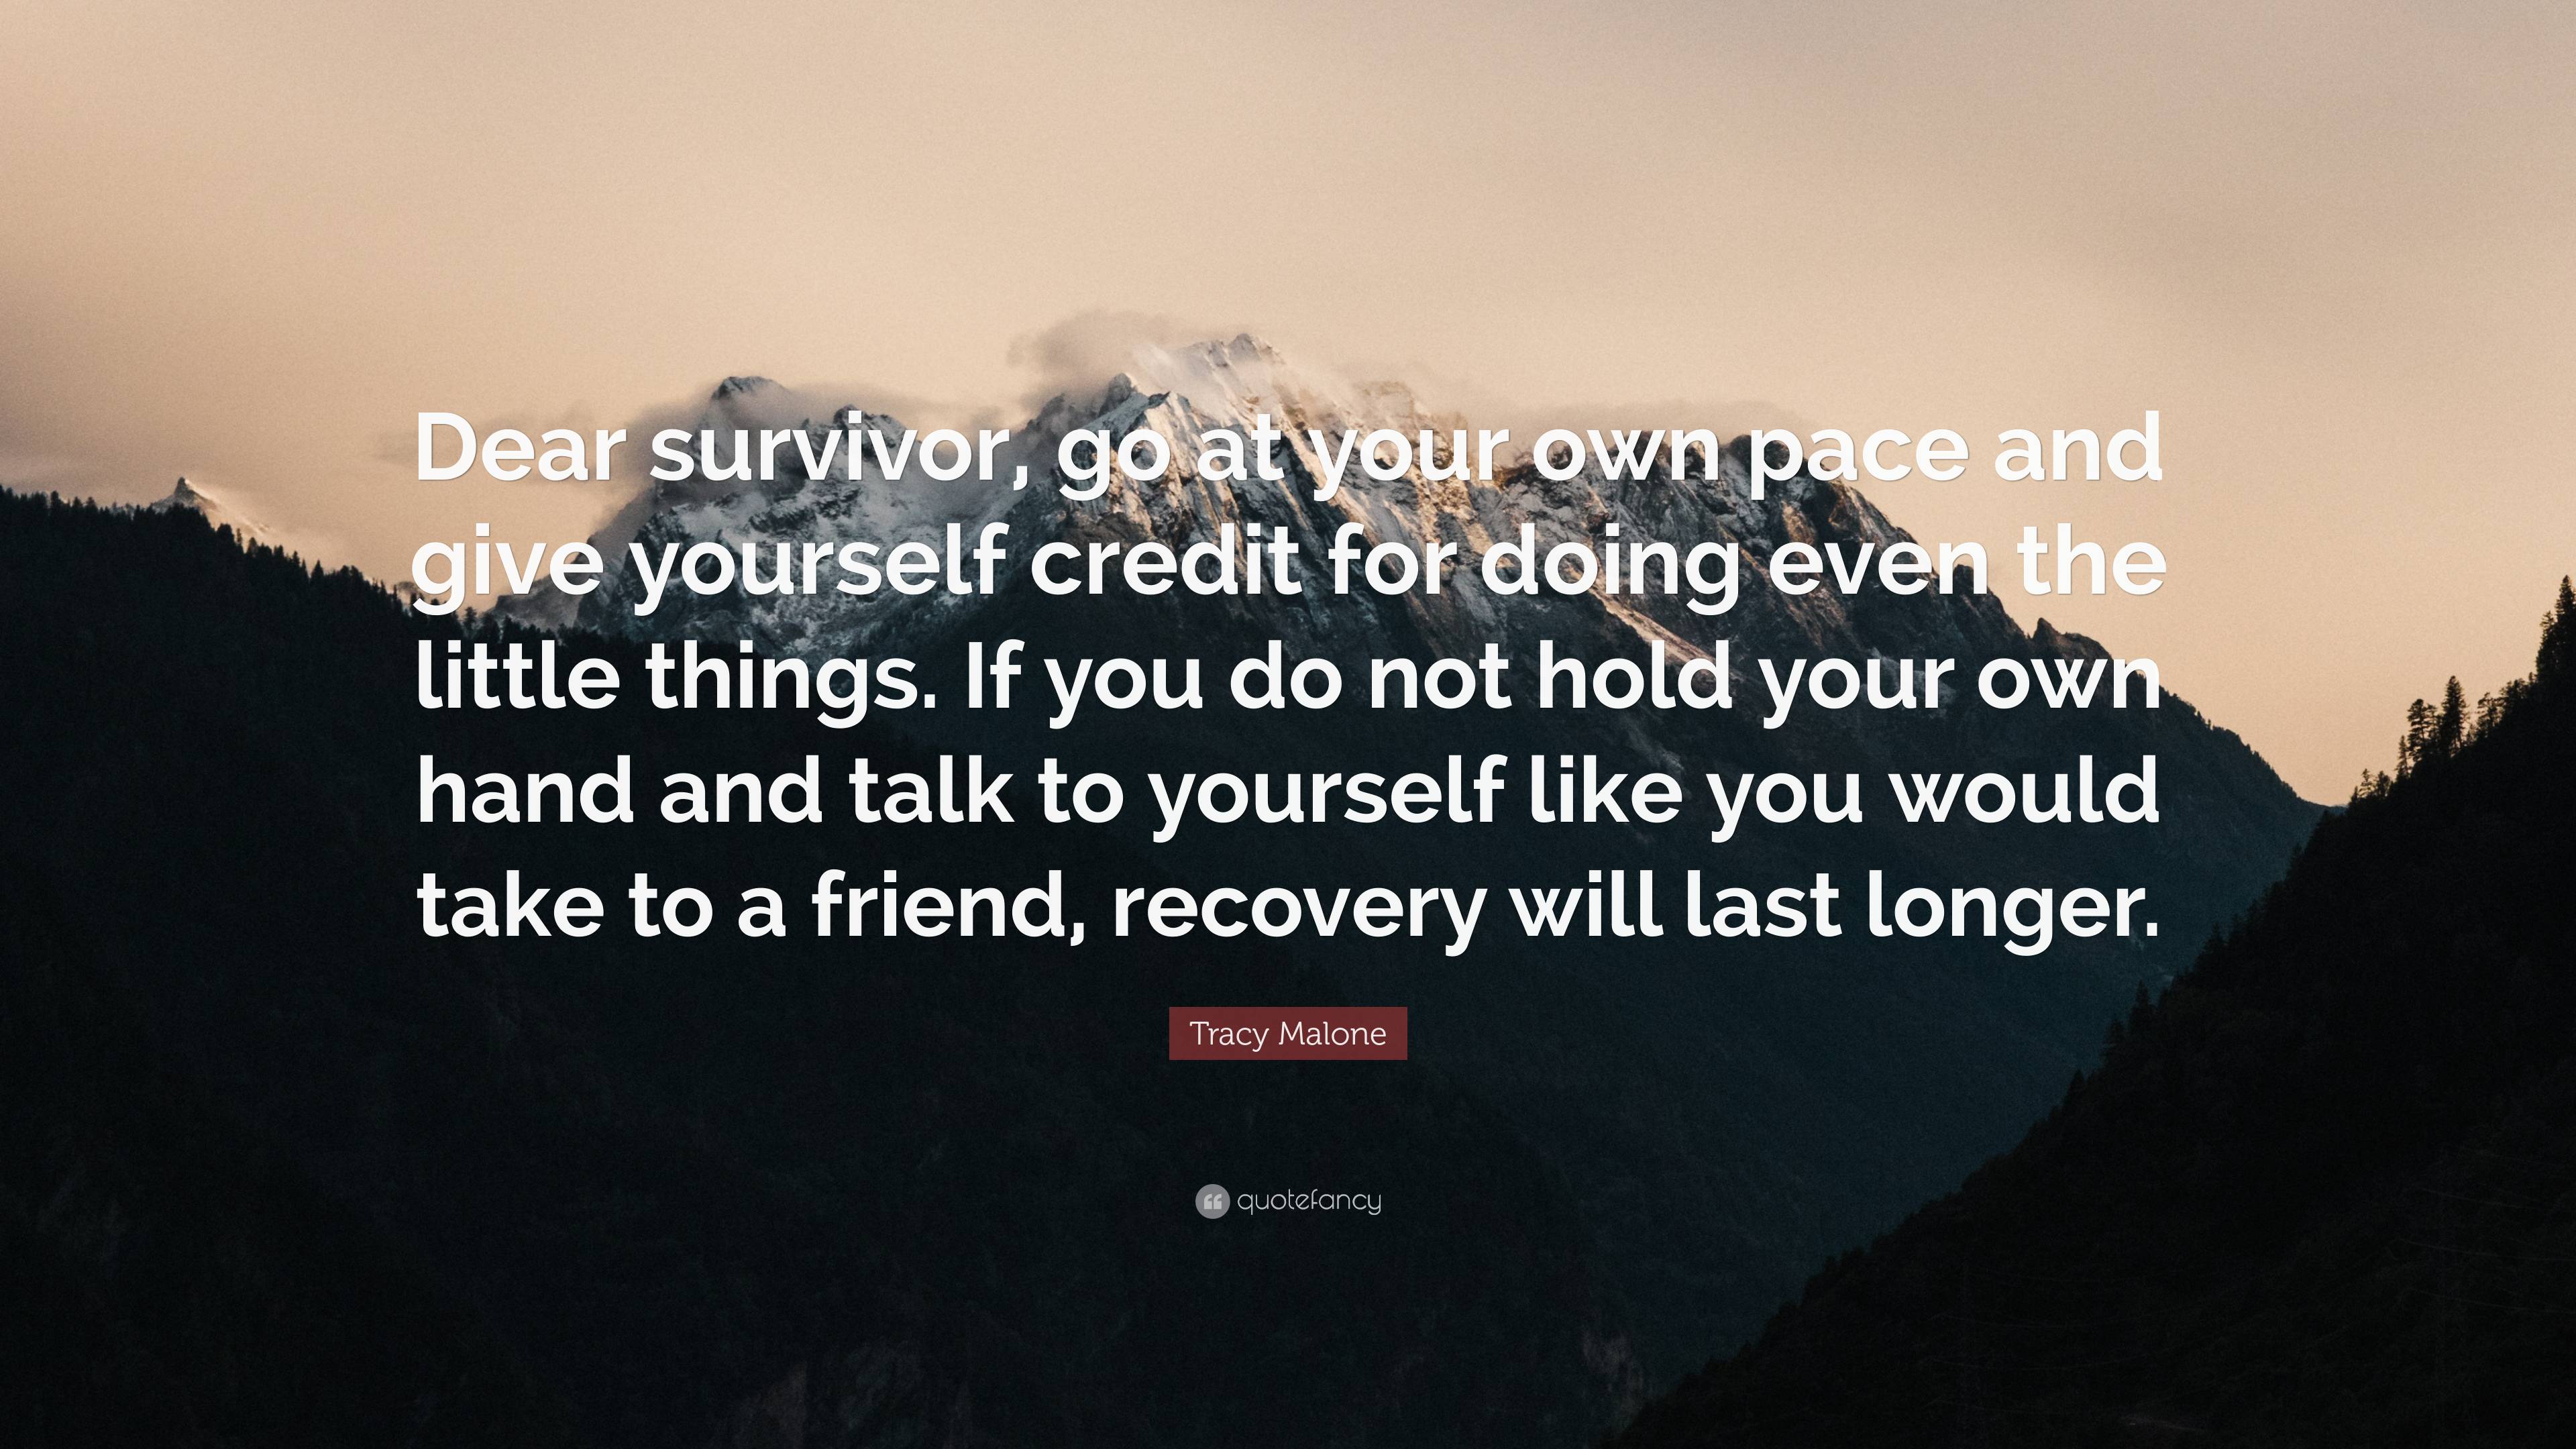 https://quotefancy.com/media/wallpaper/3840x2160/7524584-Tracy-Malone-Quote-Dear-survivor-go-at-your-own-pace-and-give.jpg